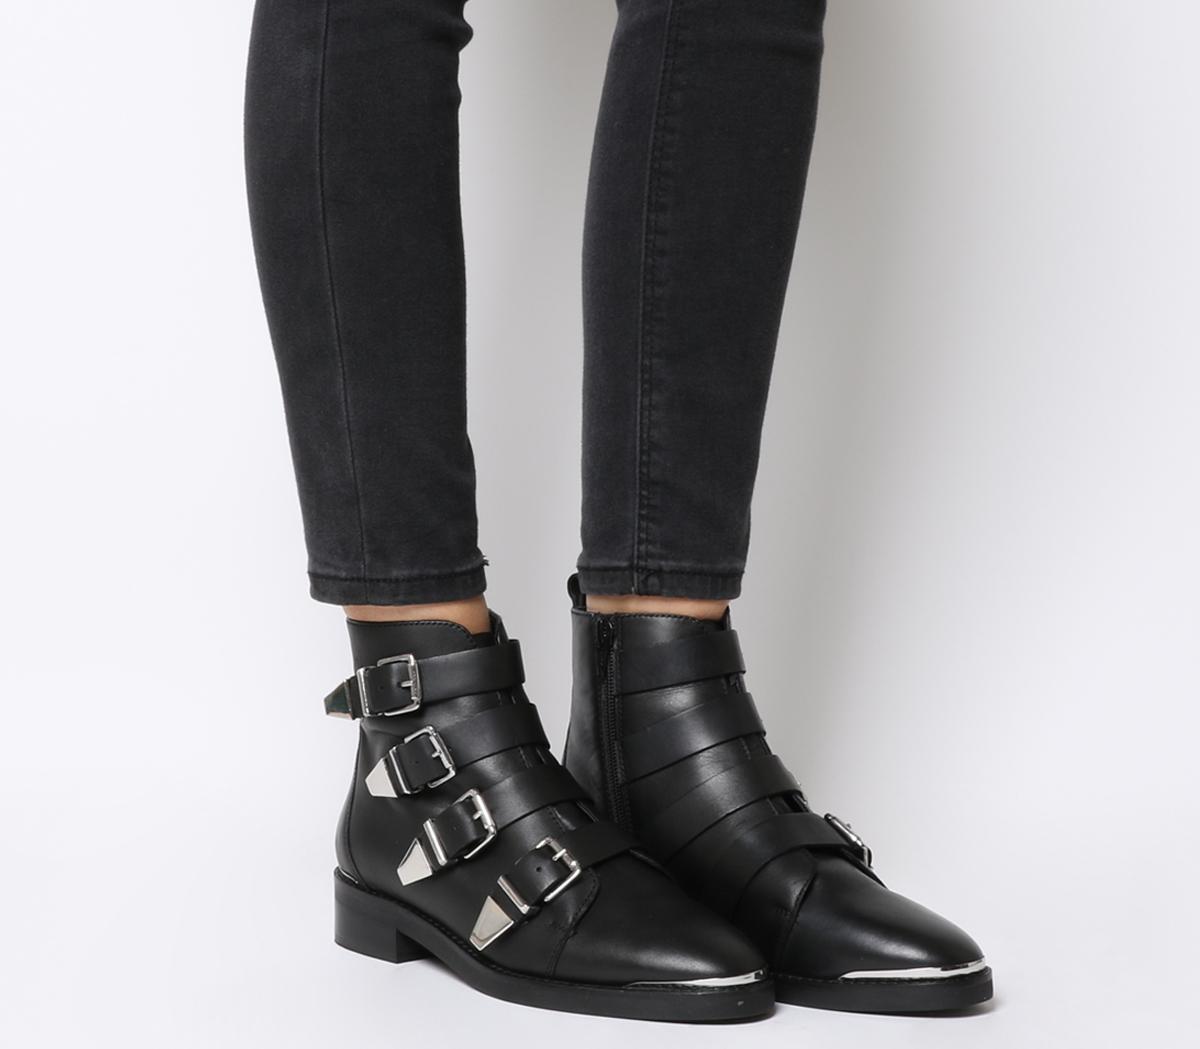 black bootie with buckles